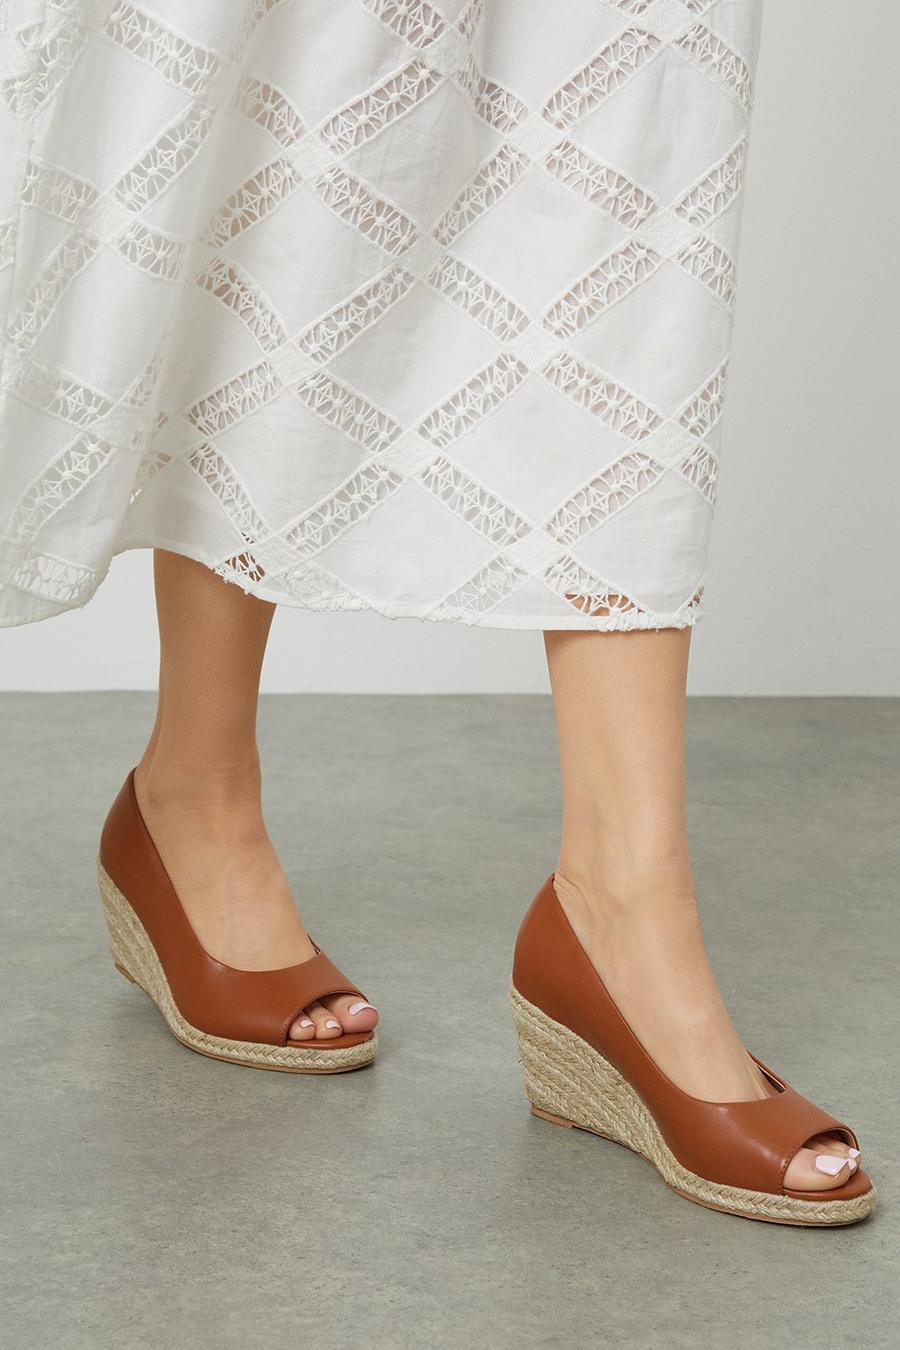 Good For The Sole: Wide Fit Heather Peep Toe Wedges